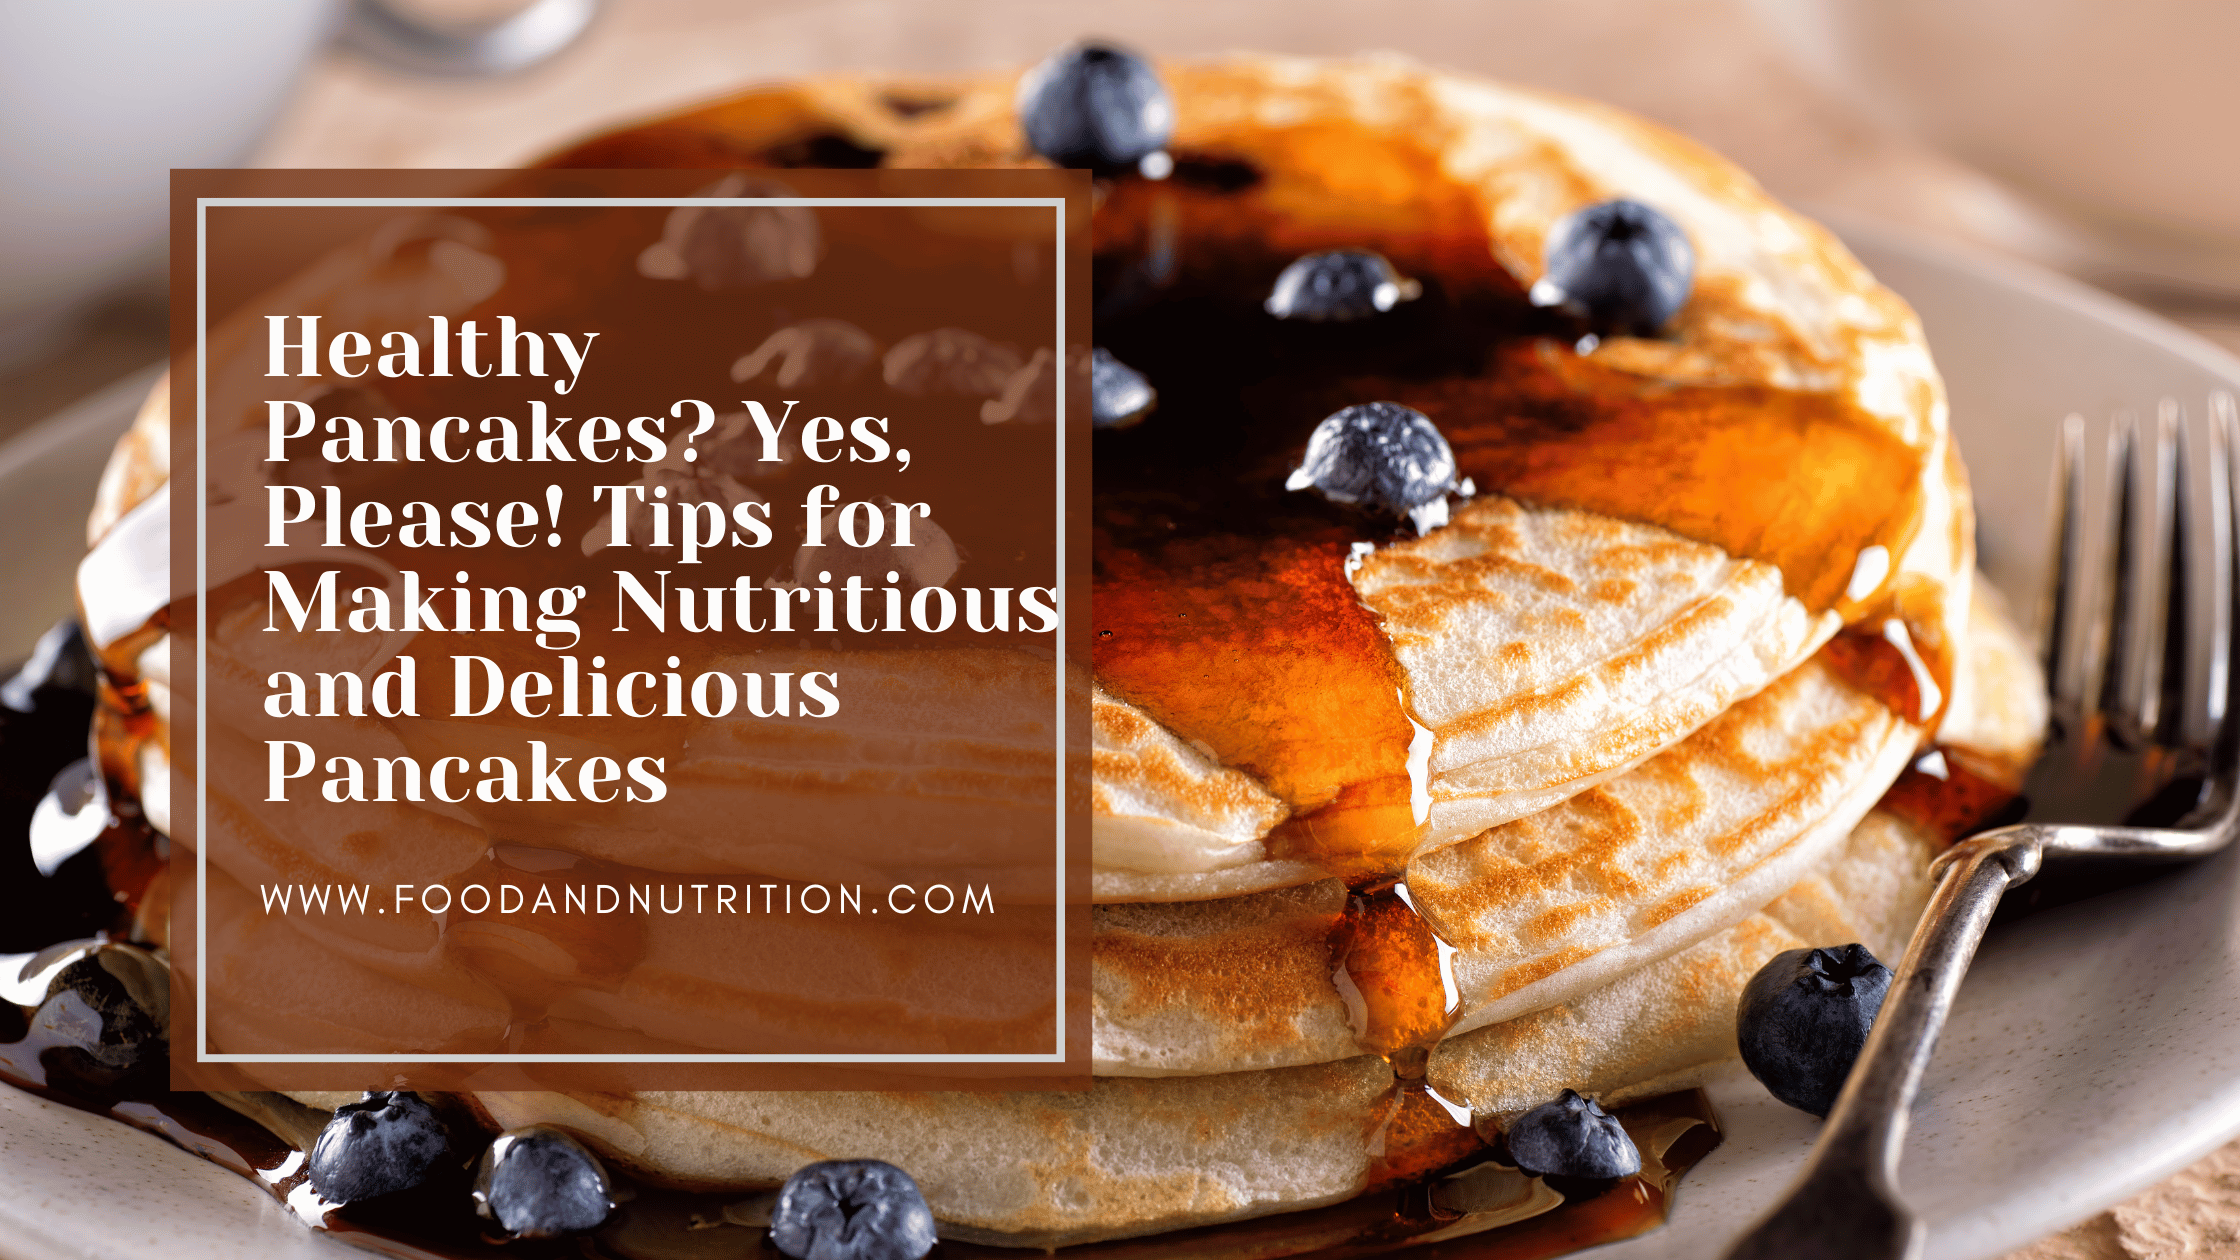 Healthy Pancakes? Yes, Please! Tips for Making Nutritious and Delicious Pancakes